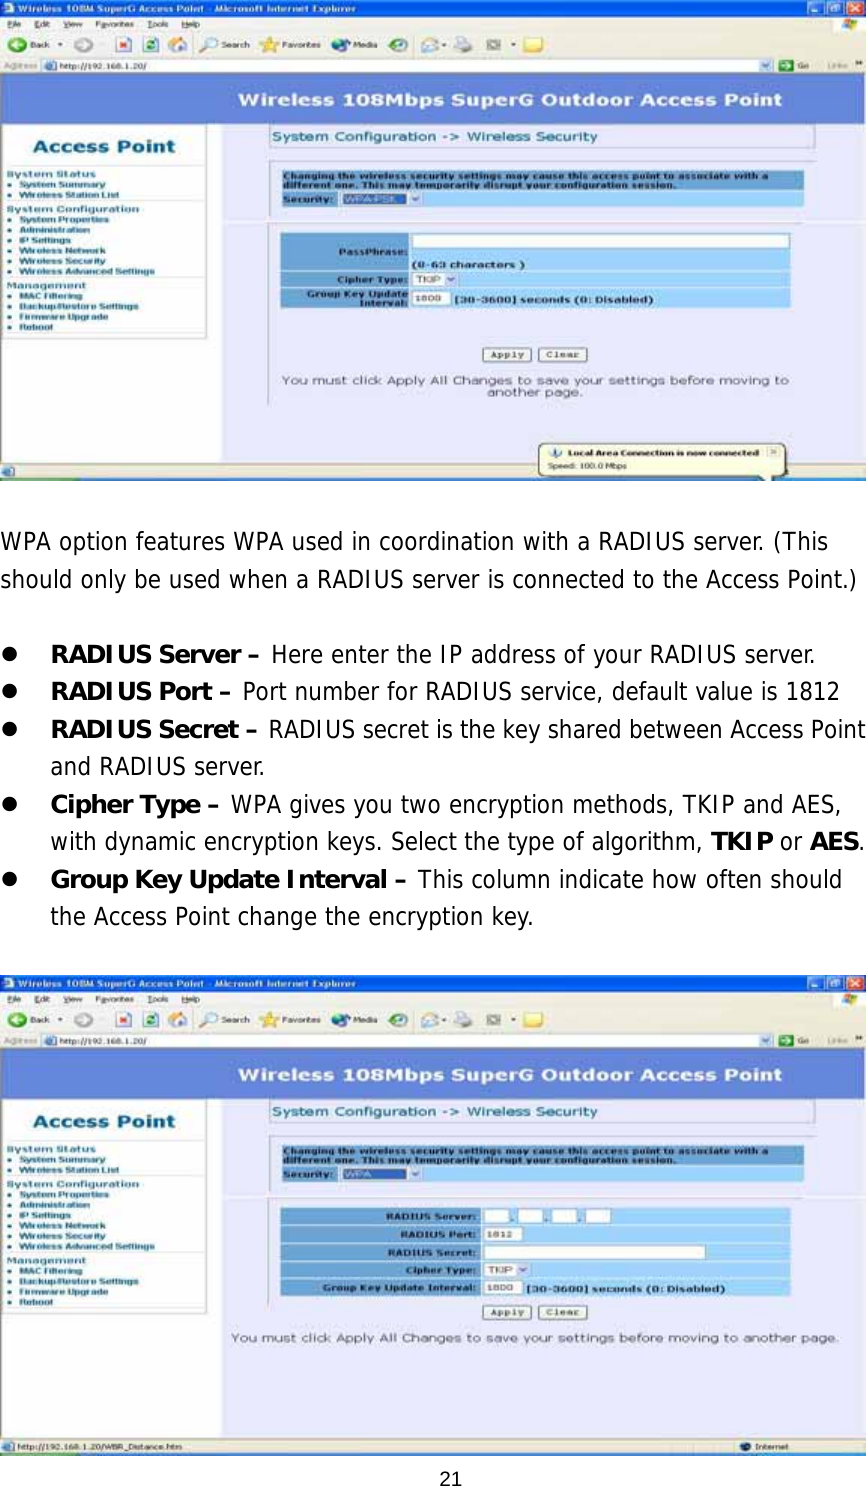  21  WPA option features WPA used in coordination with a RADIUS server. (This should only be used when a RADIUS server is connected to the Access Point.)      RADIUS Server – Here enter the IP address of your RADIUS server.     RADIUS Port – Port number for RADIUS service, default value is 1812   RADIUS Secret – RADIUS secret is the key shared between Access Point and RADIUS server.   Cipher Type – WPA gives you two encryption methods, TKIP and AES, with dynamic encryption keys. Select the type of algorithm, TKIP or AES.   Group Key Update Interval – This column indicate how often should the Access Point change the encryption key.   